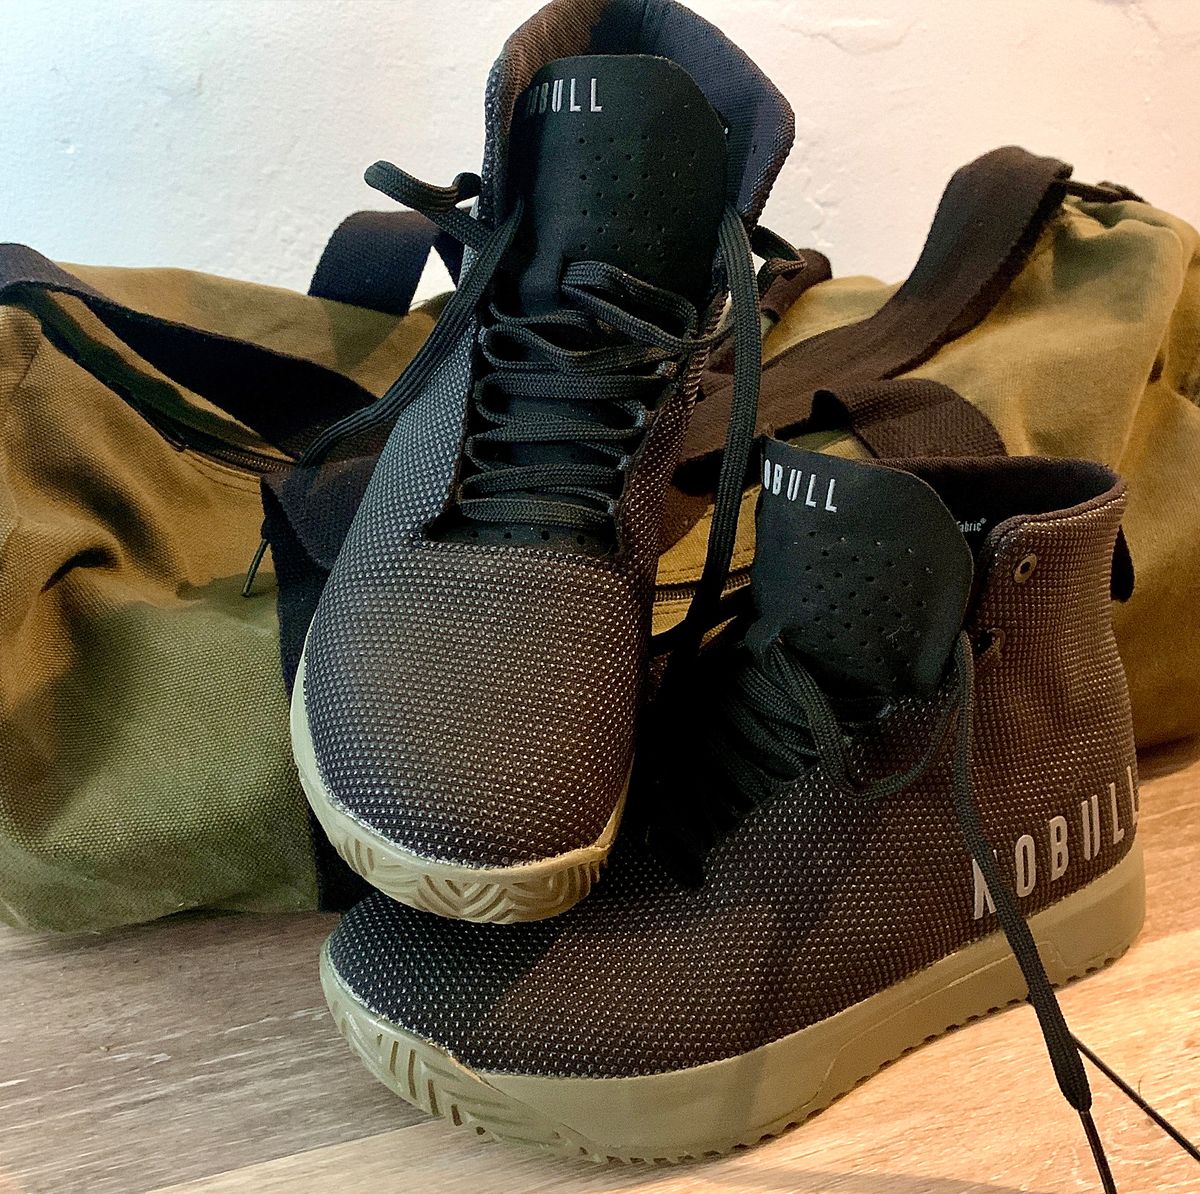 Nobull High-Top Trainer+ Review: Elevating the Workout